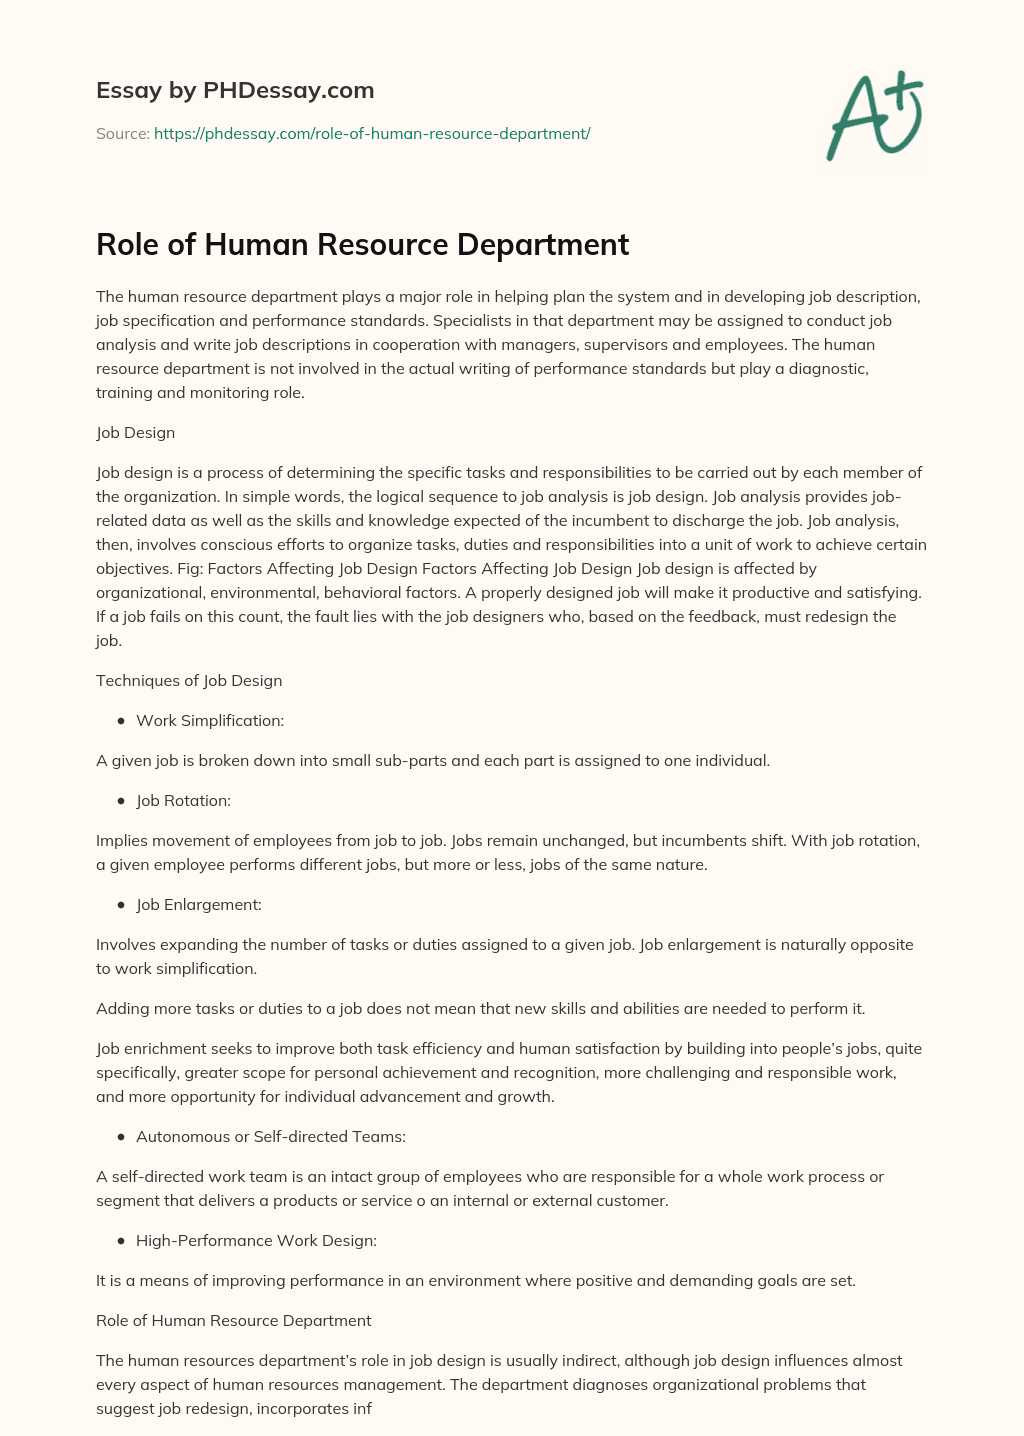 role of human resource department essay